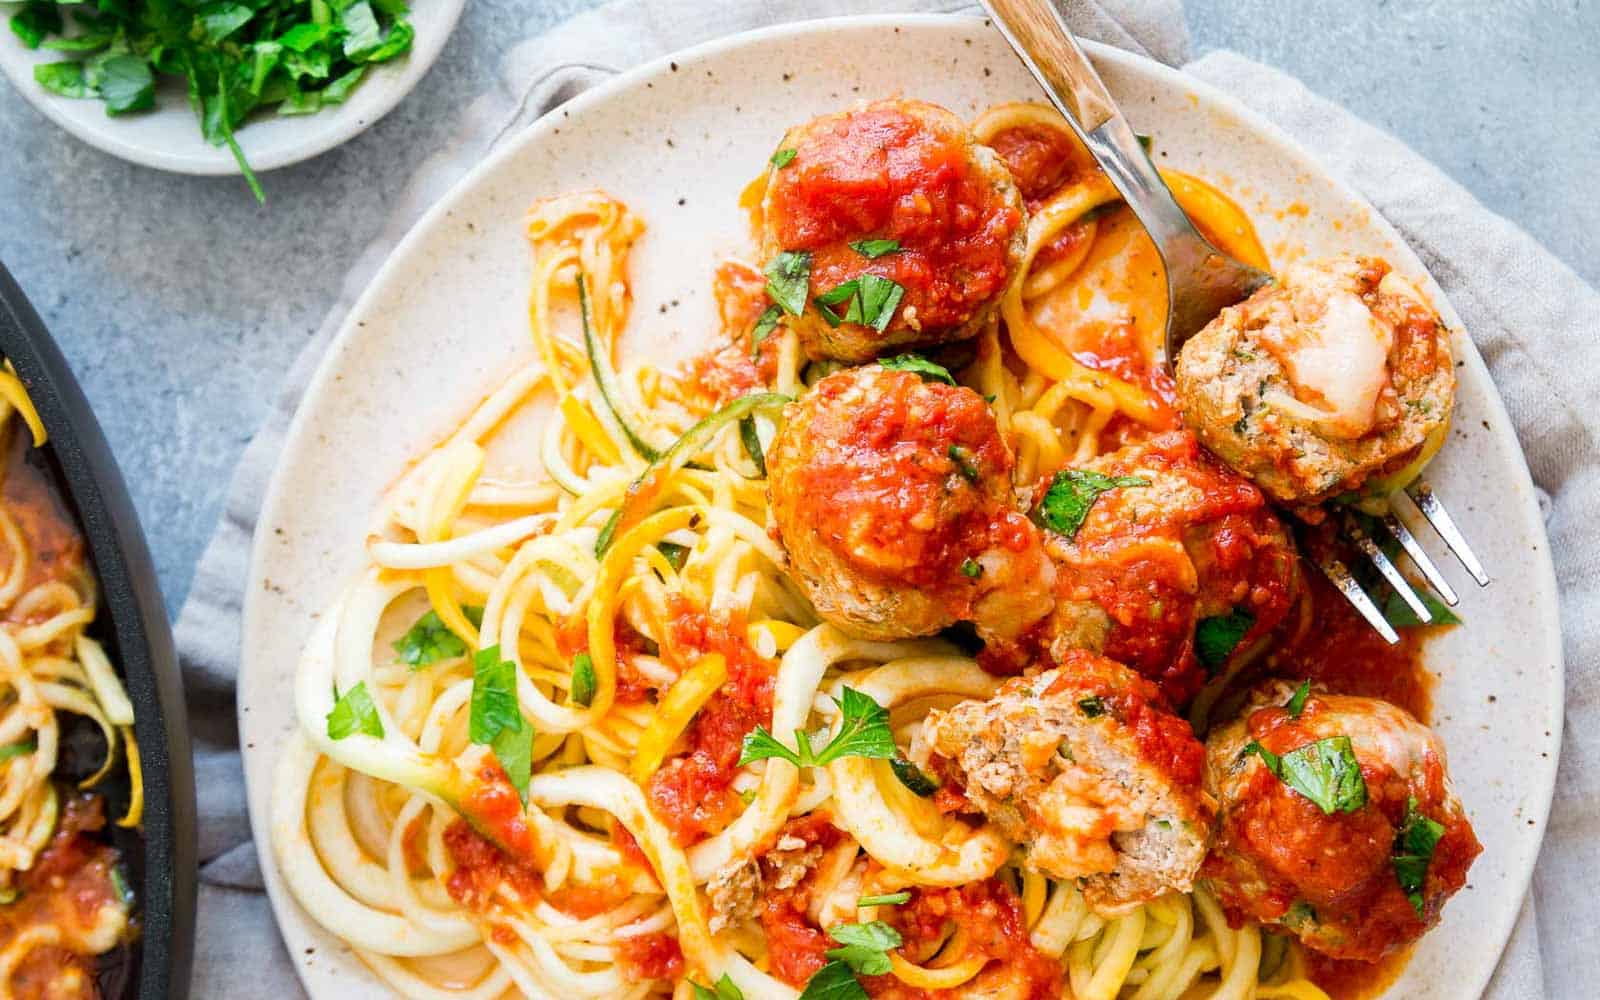 Cheddar stuffed turkey meatballs served with zoodles.